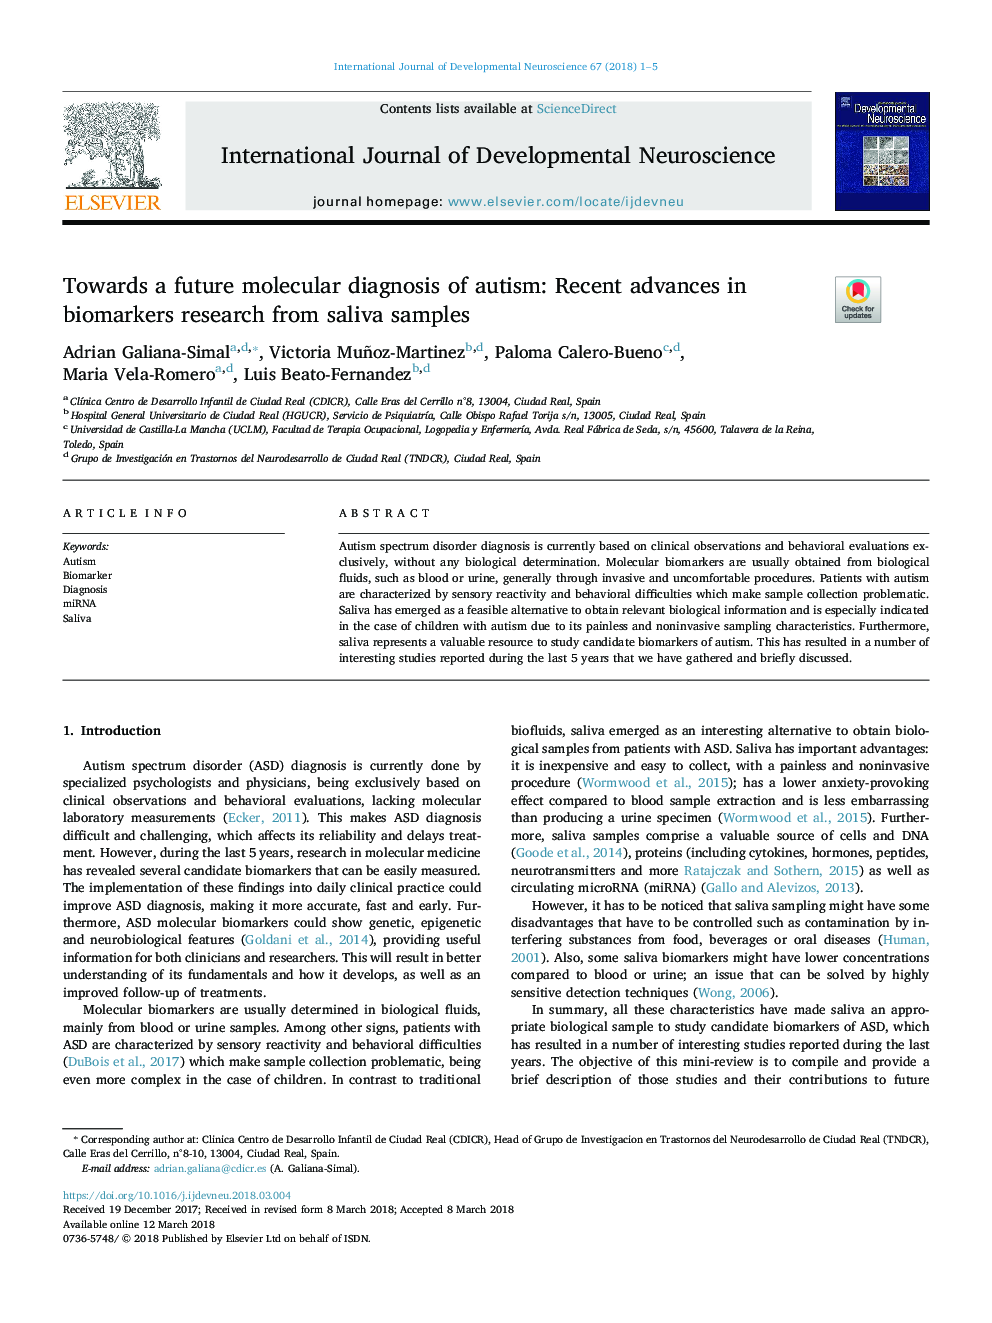 Towards a future molecular diagnosis of autism: Recent advances in biomarkers research from saliva samples